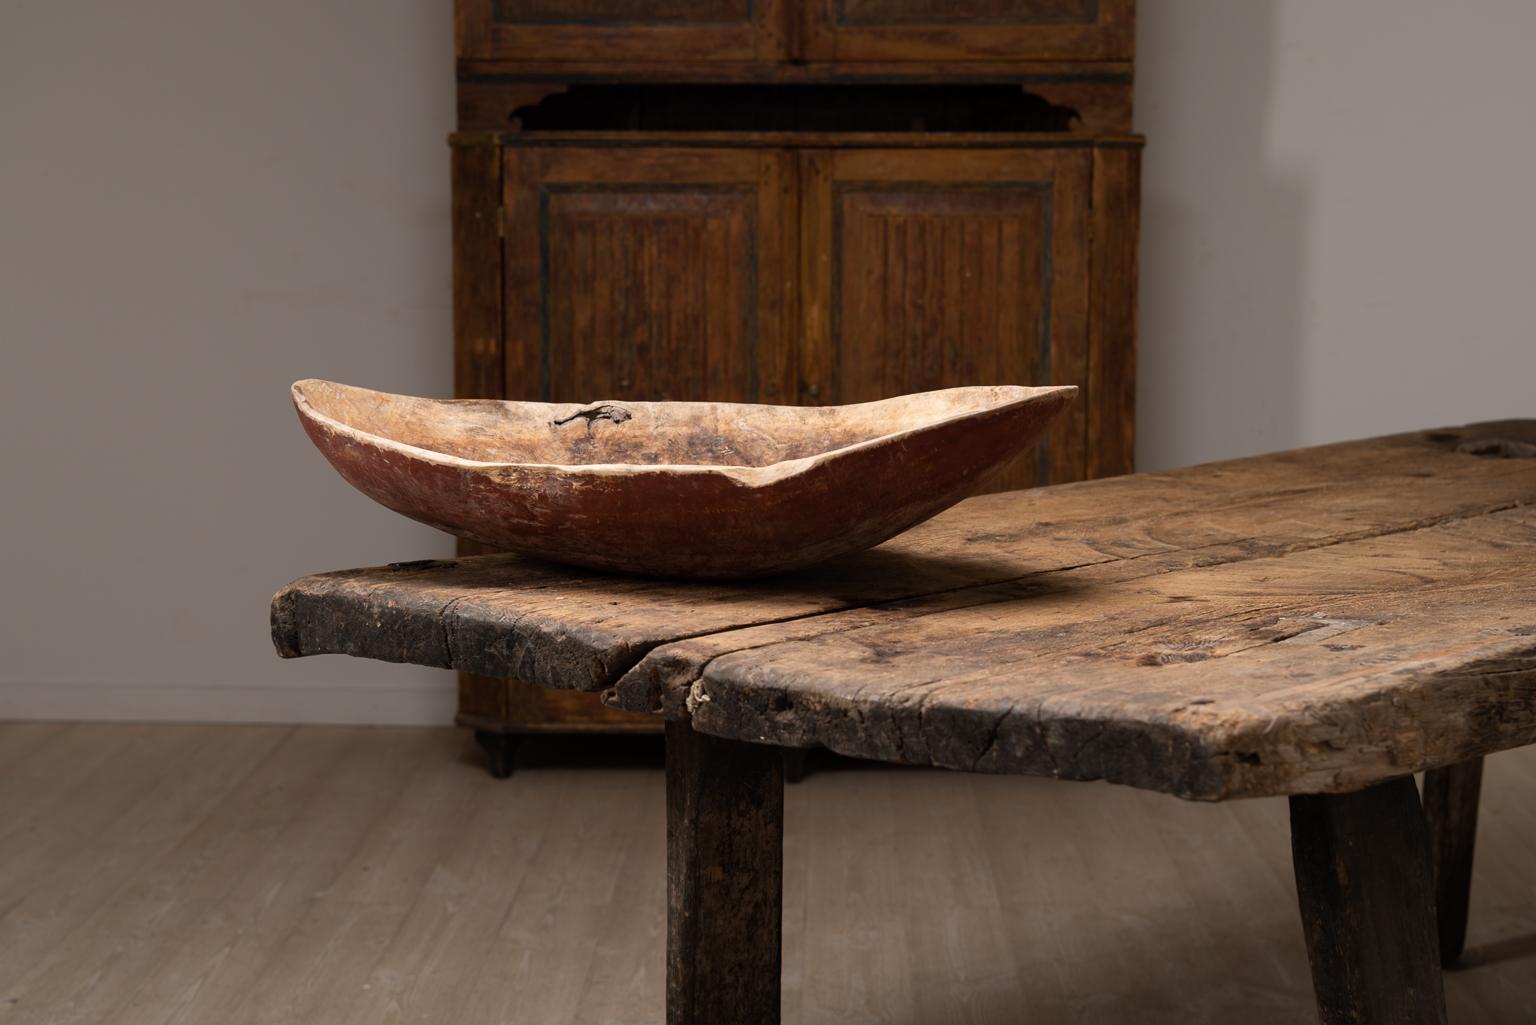 Hand-Crafted Unique 19th Century Wooden Bowl from Northern Sweden